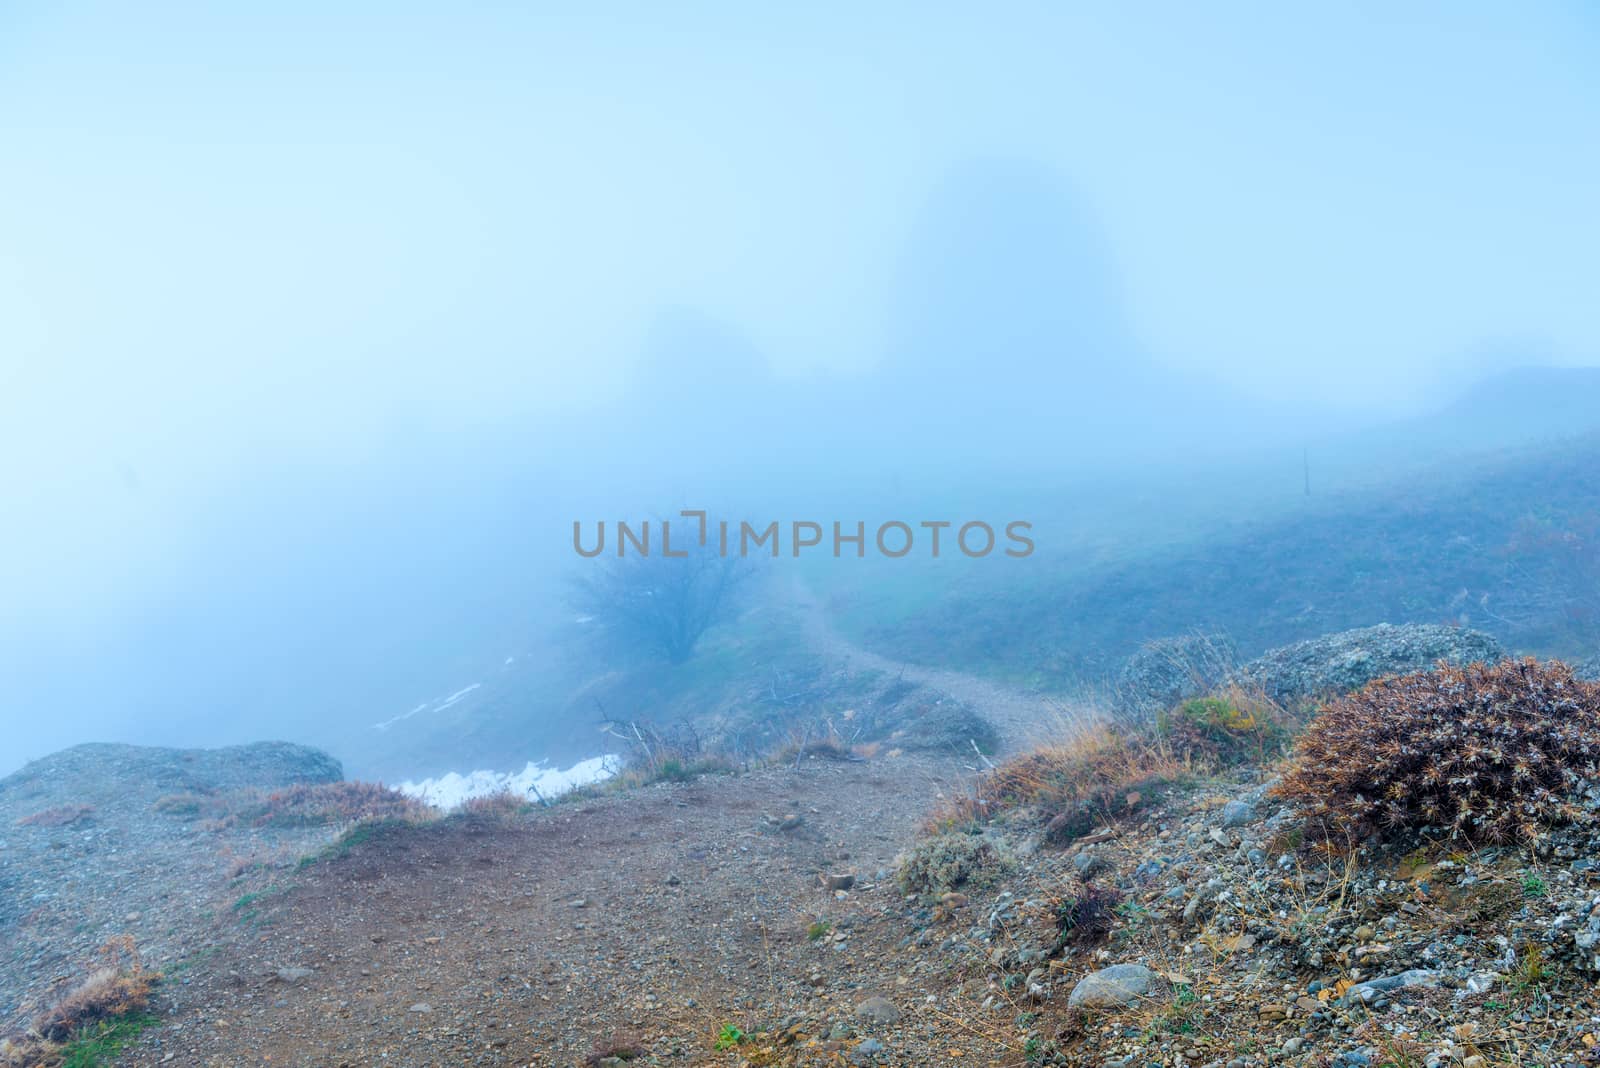 gloomy autumn landscape on a foggy day in the mountains by kosmsos111